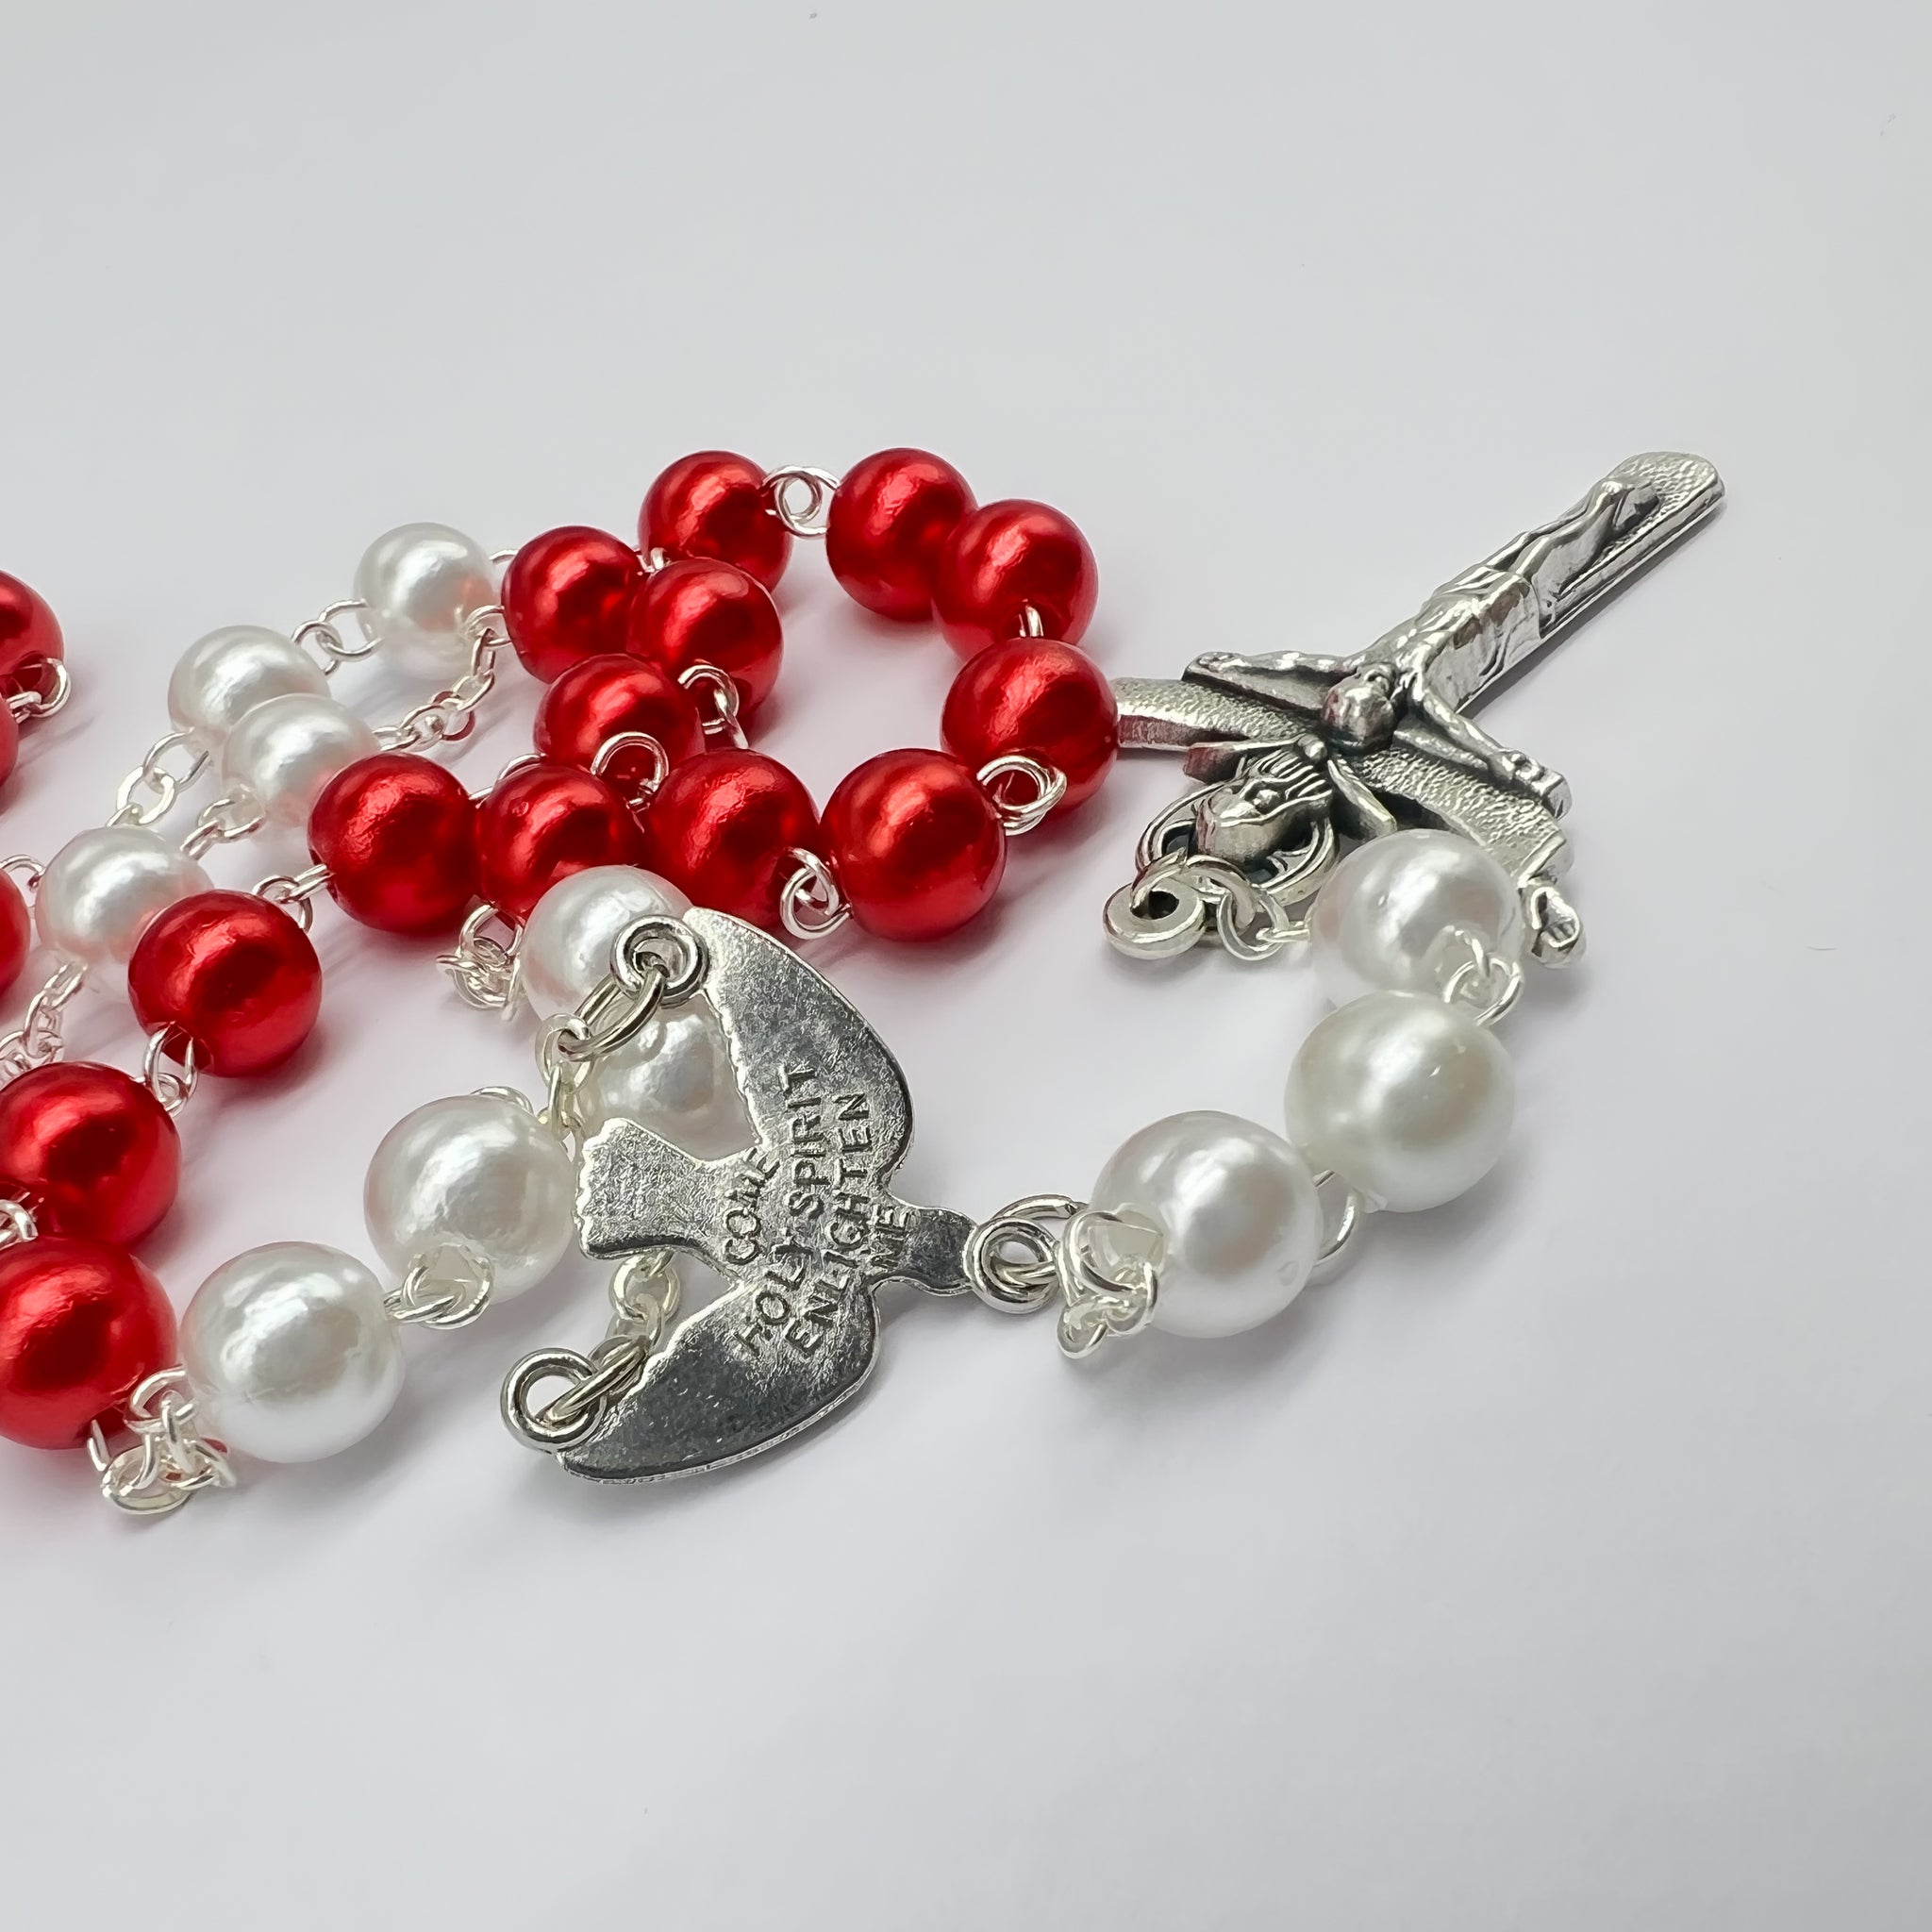 Holy Spirit Chaplet, Confirmation Gifts, Rosary Favors, Mini